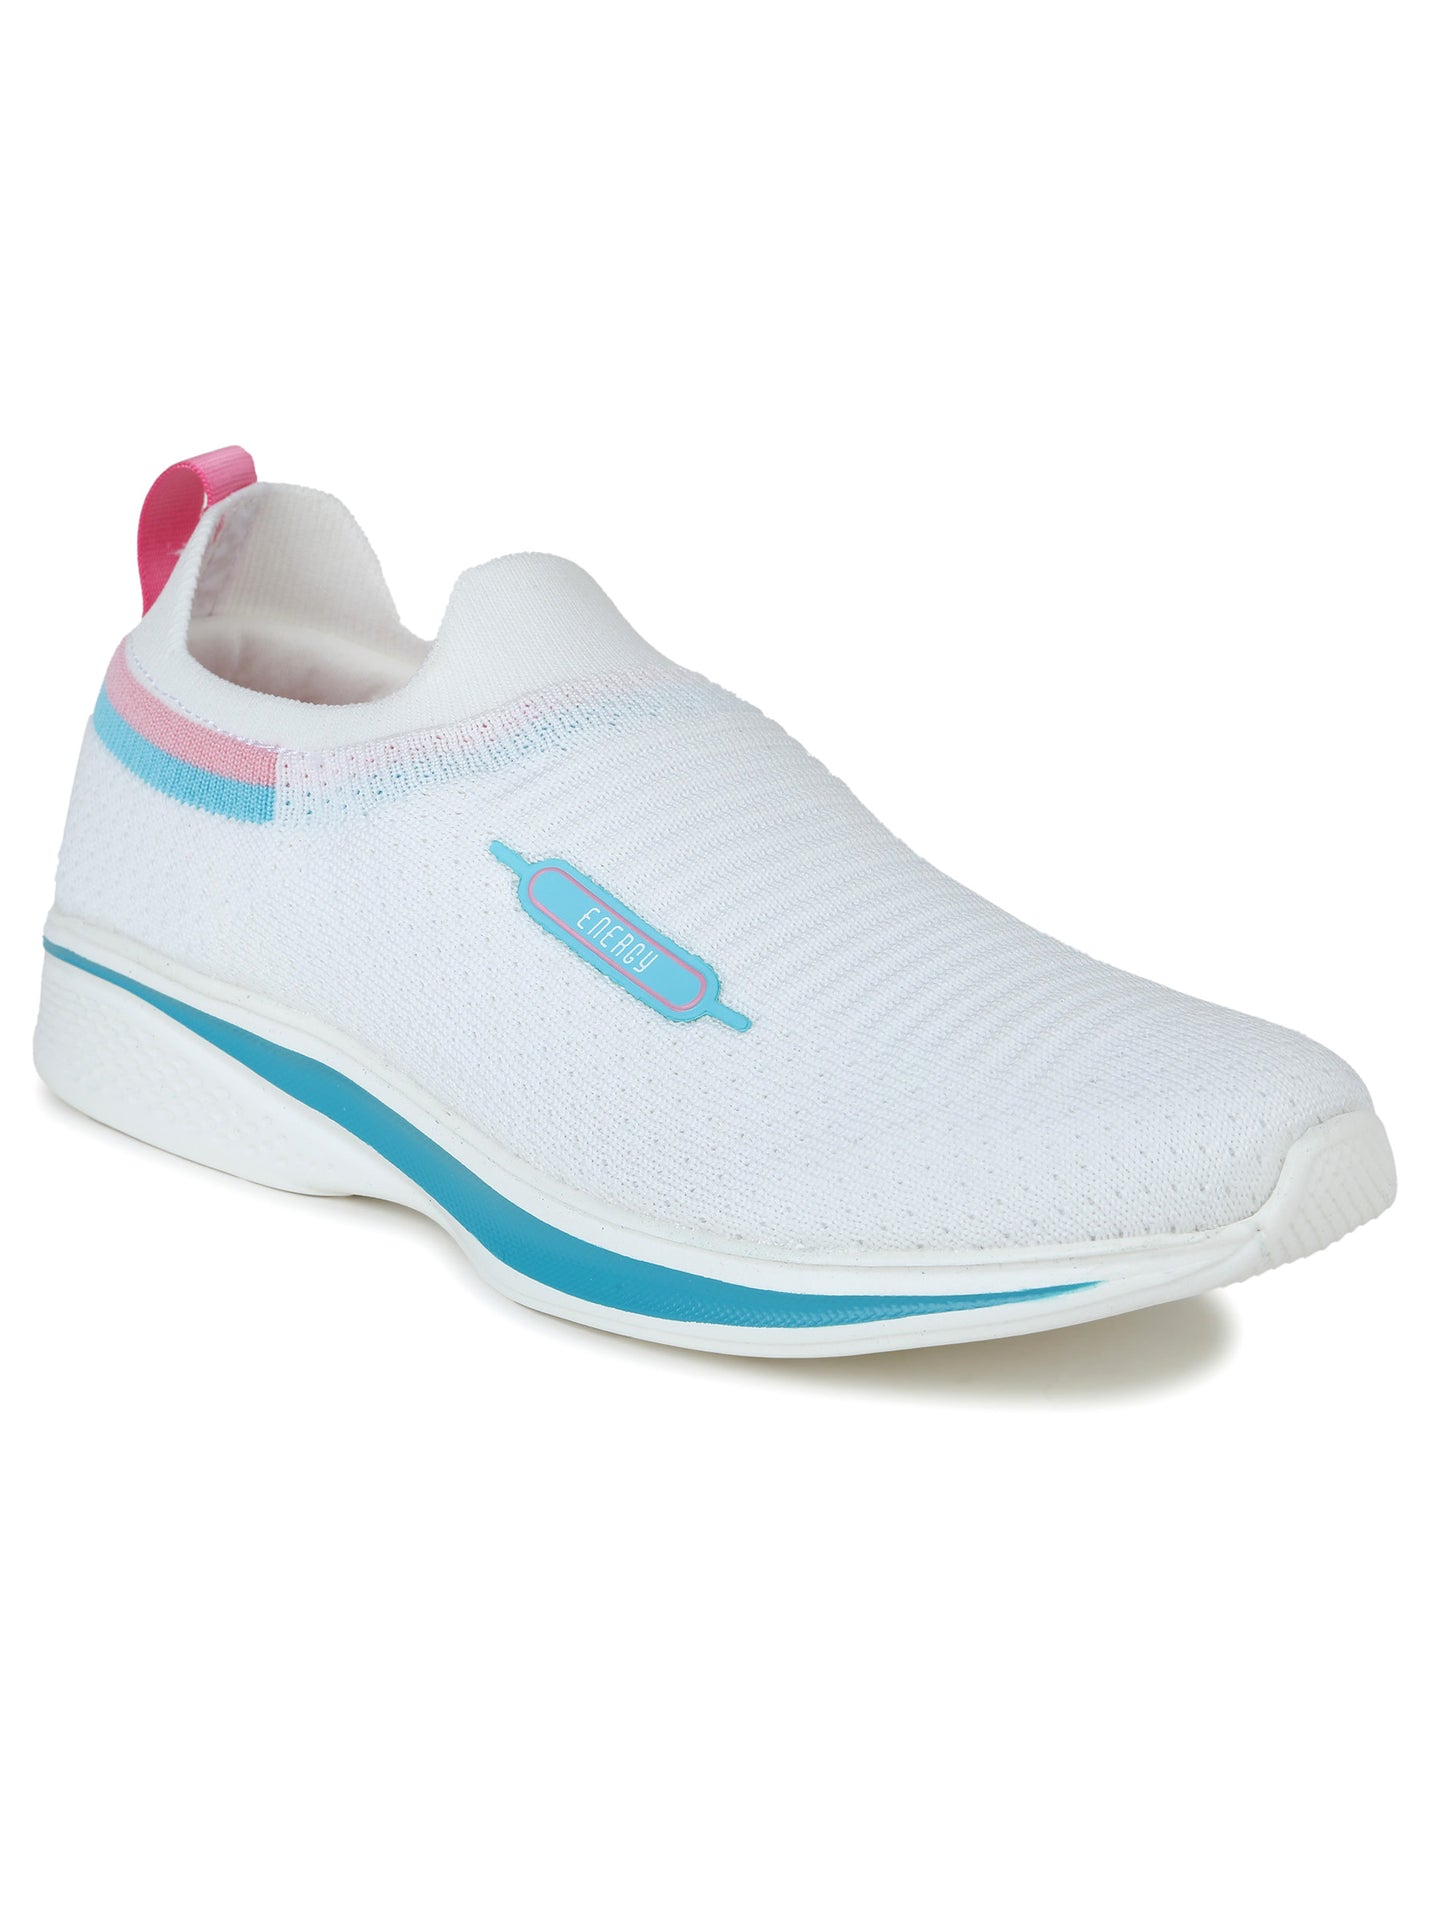 ABROS LILY-L SPORTS SHOES FOR WOMEN